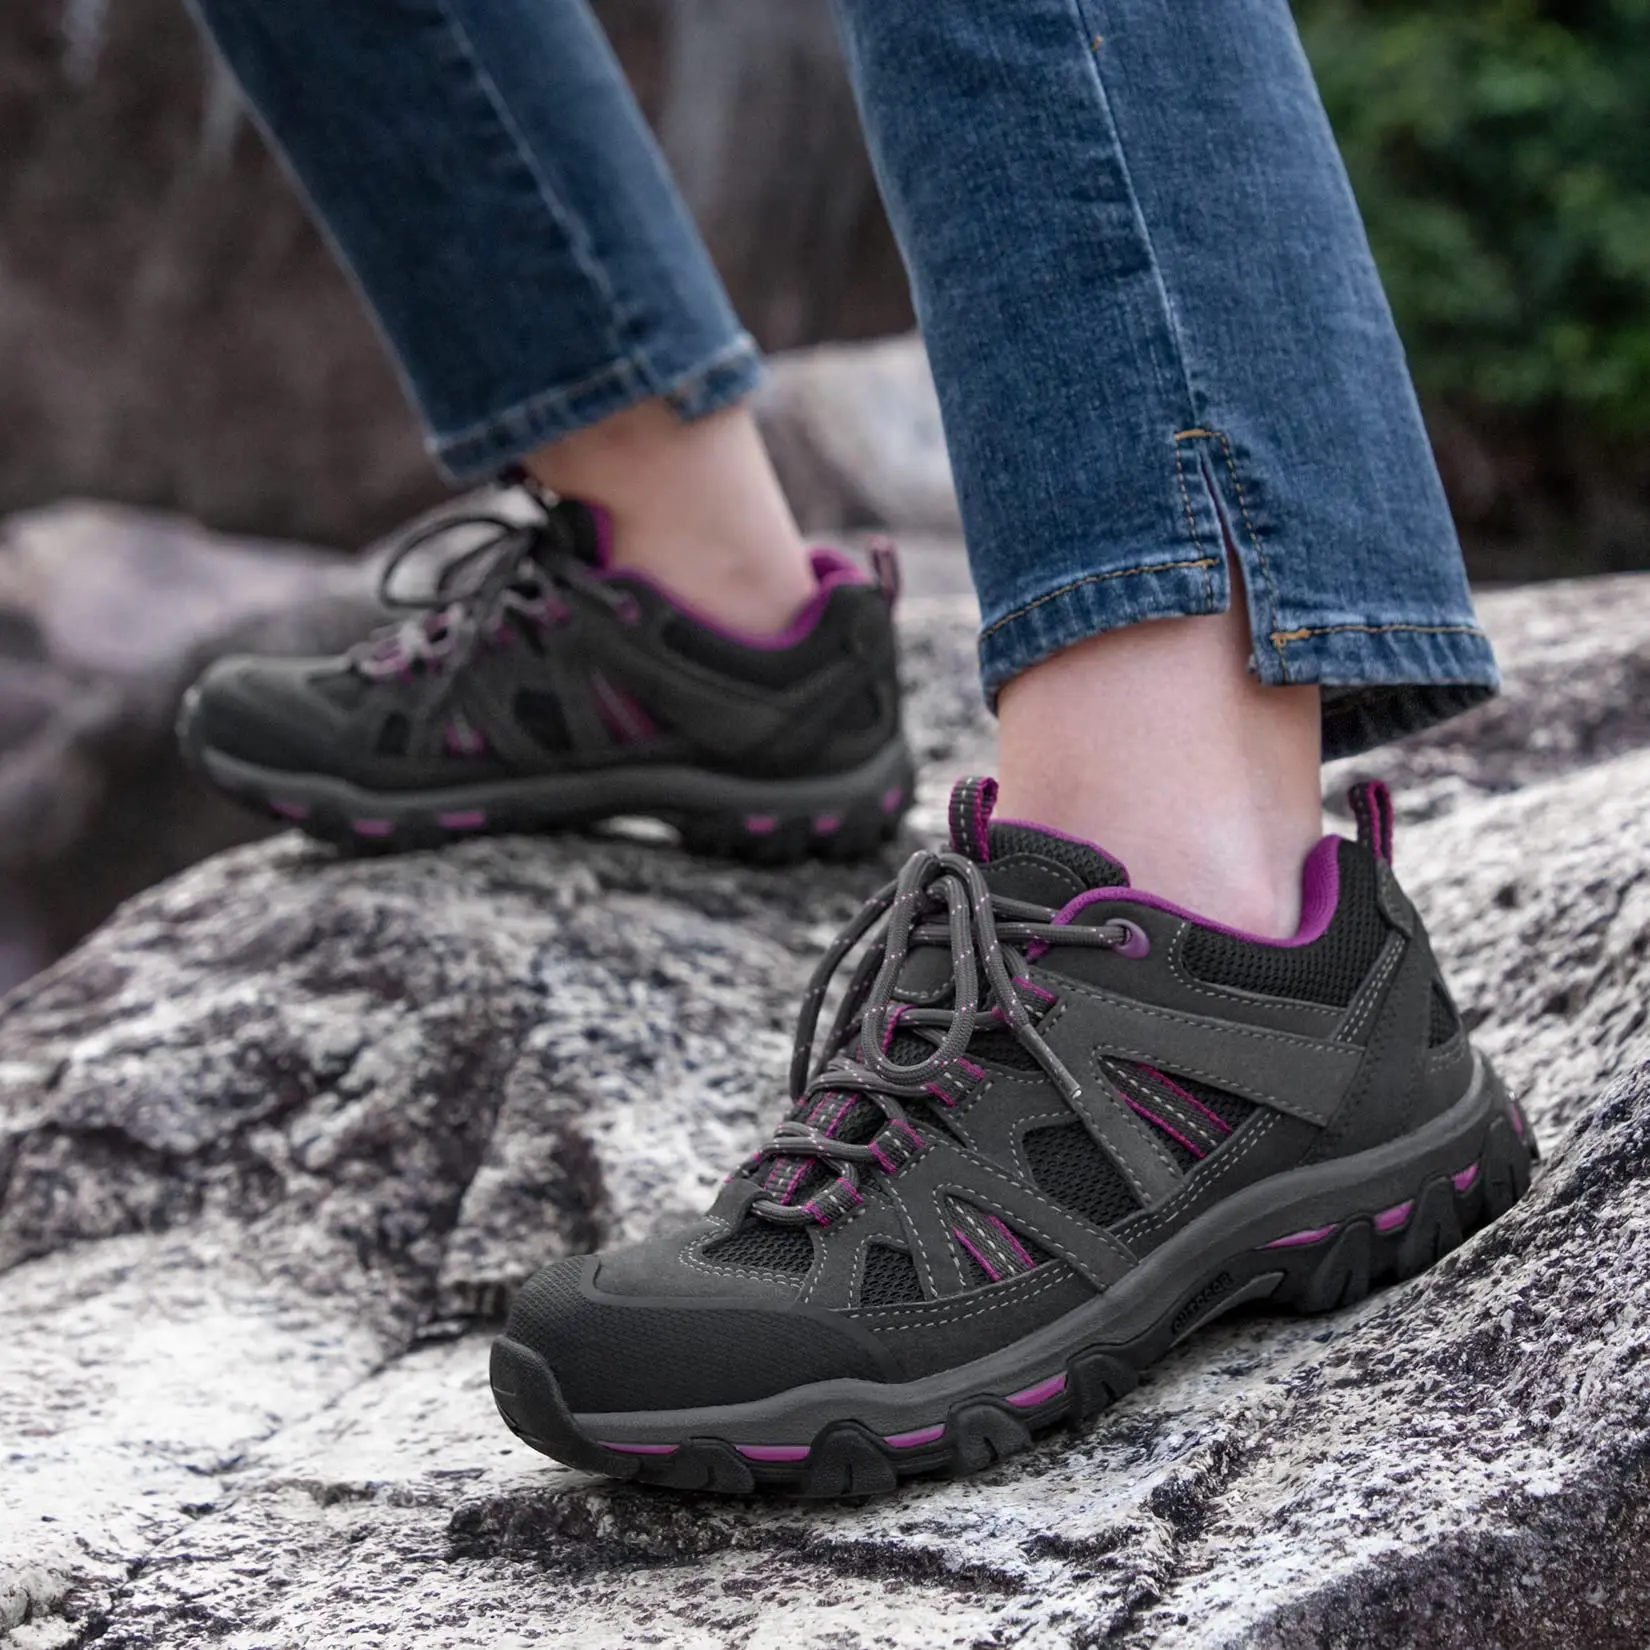 

GOLDEN CAMEL Women's Hiking Shoes Lightweight Trail Running Shoes Non-Slip Breathable Outdoor Sneakers for Trekking Walking